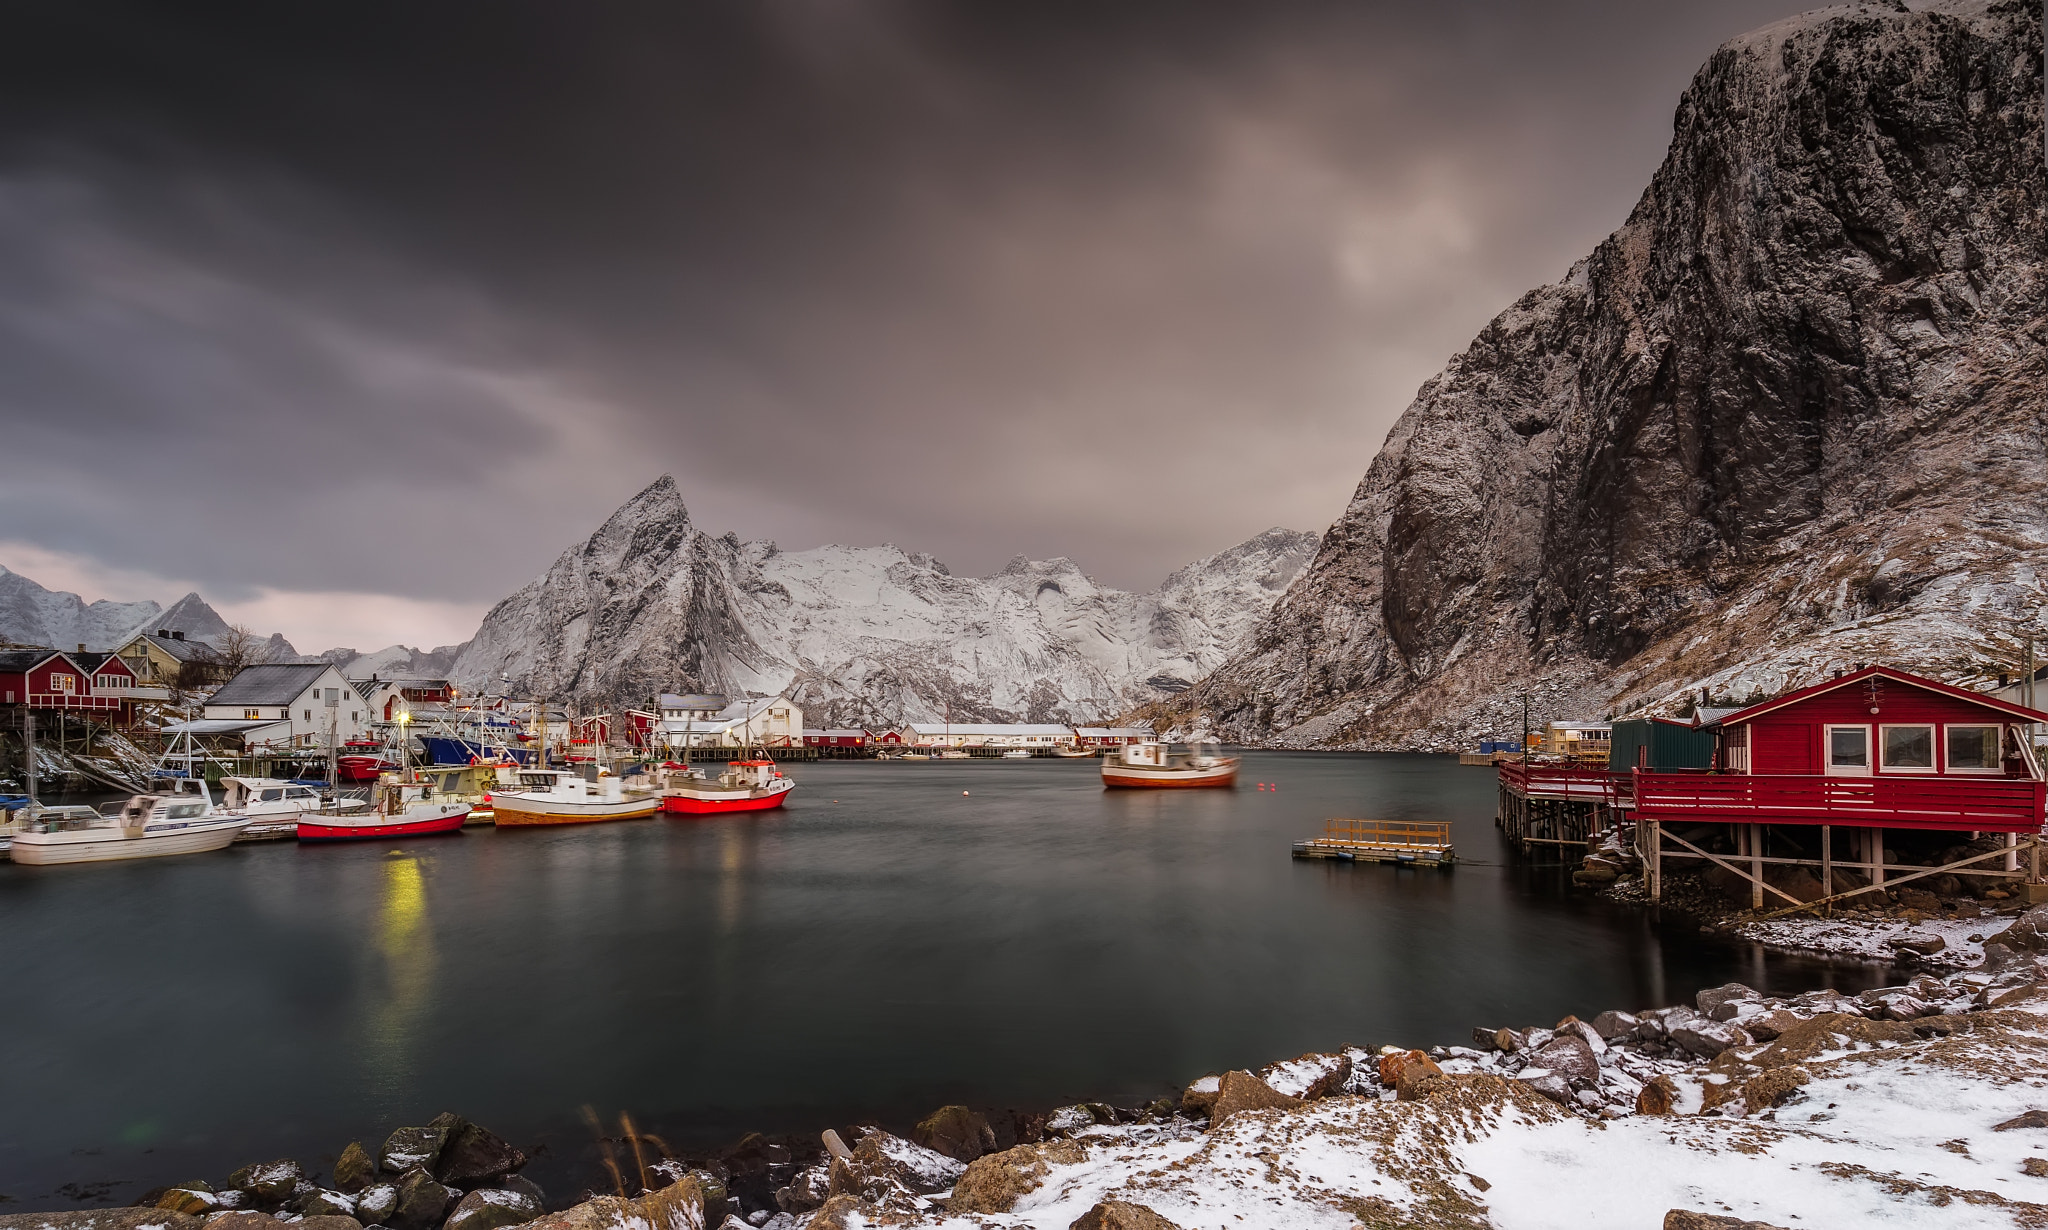 Sony a7 sample photo. The  fishermen village at reine photography